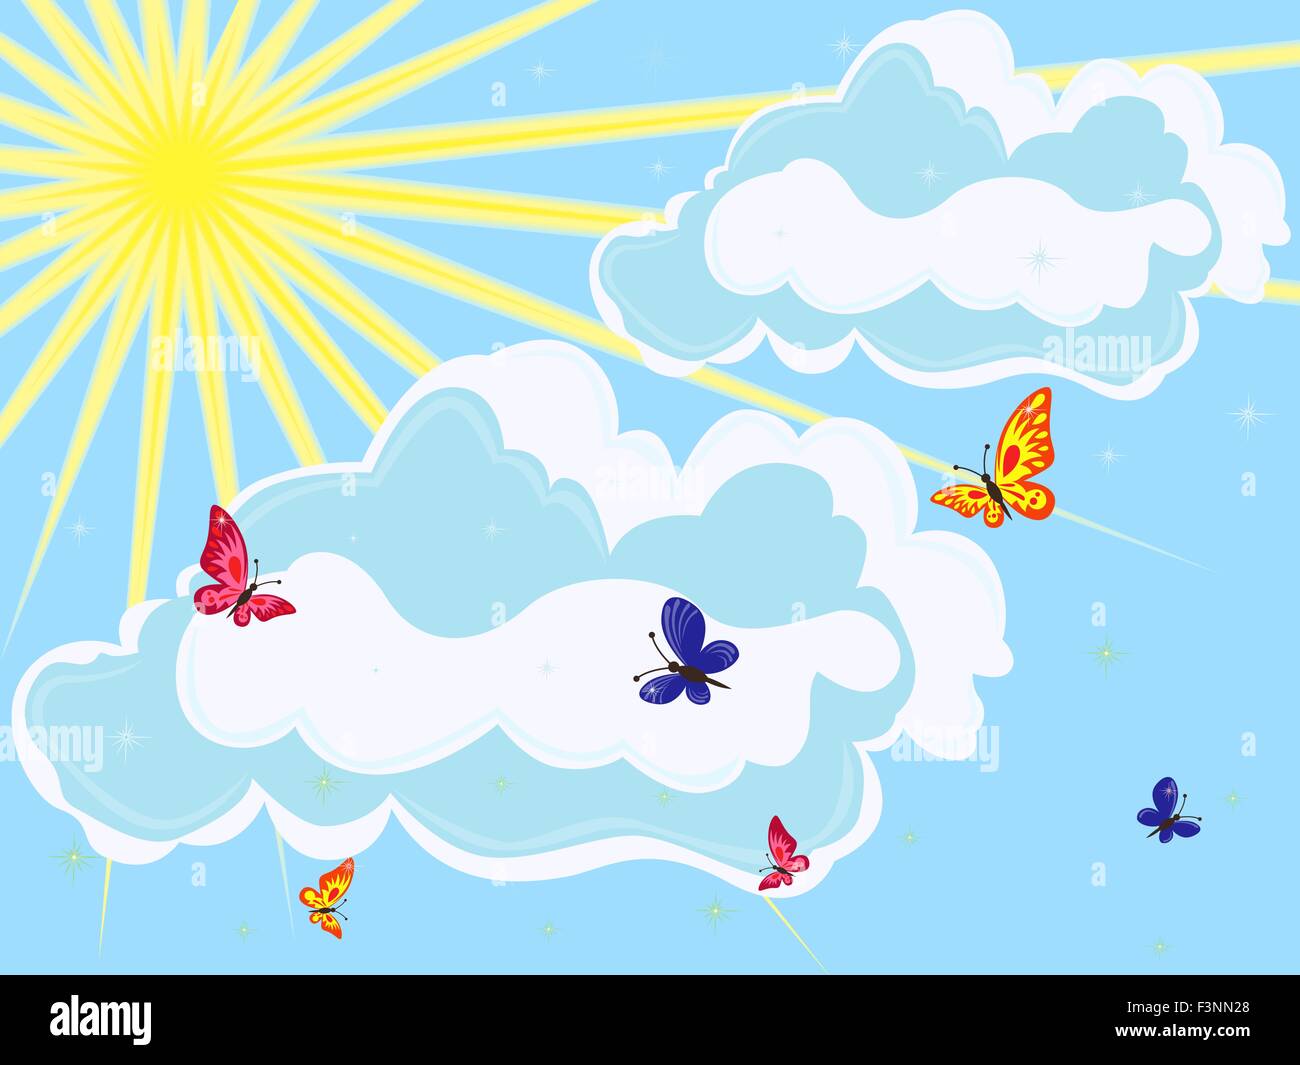 Sky with sun, clouds and butterflies on foreground. Hand drawing vector illustration Stock Vector